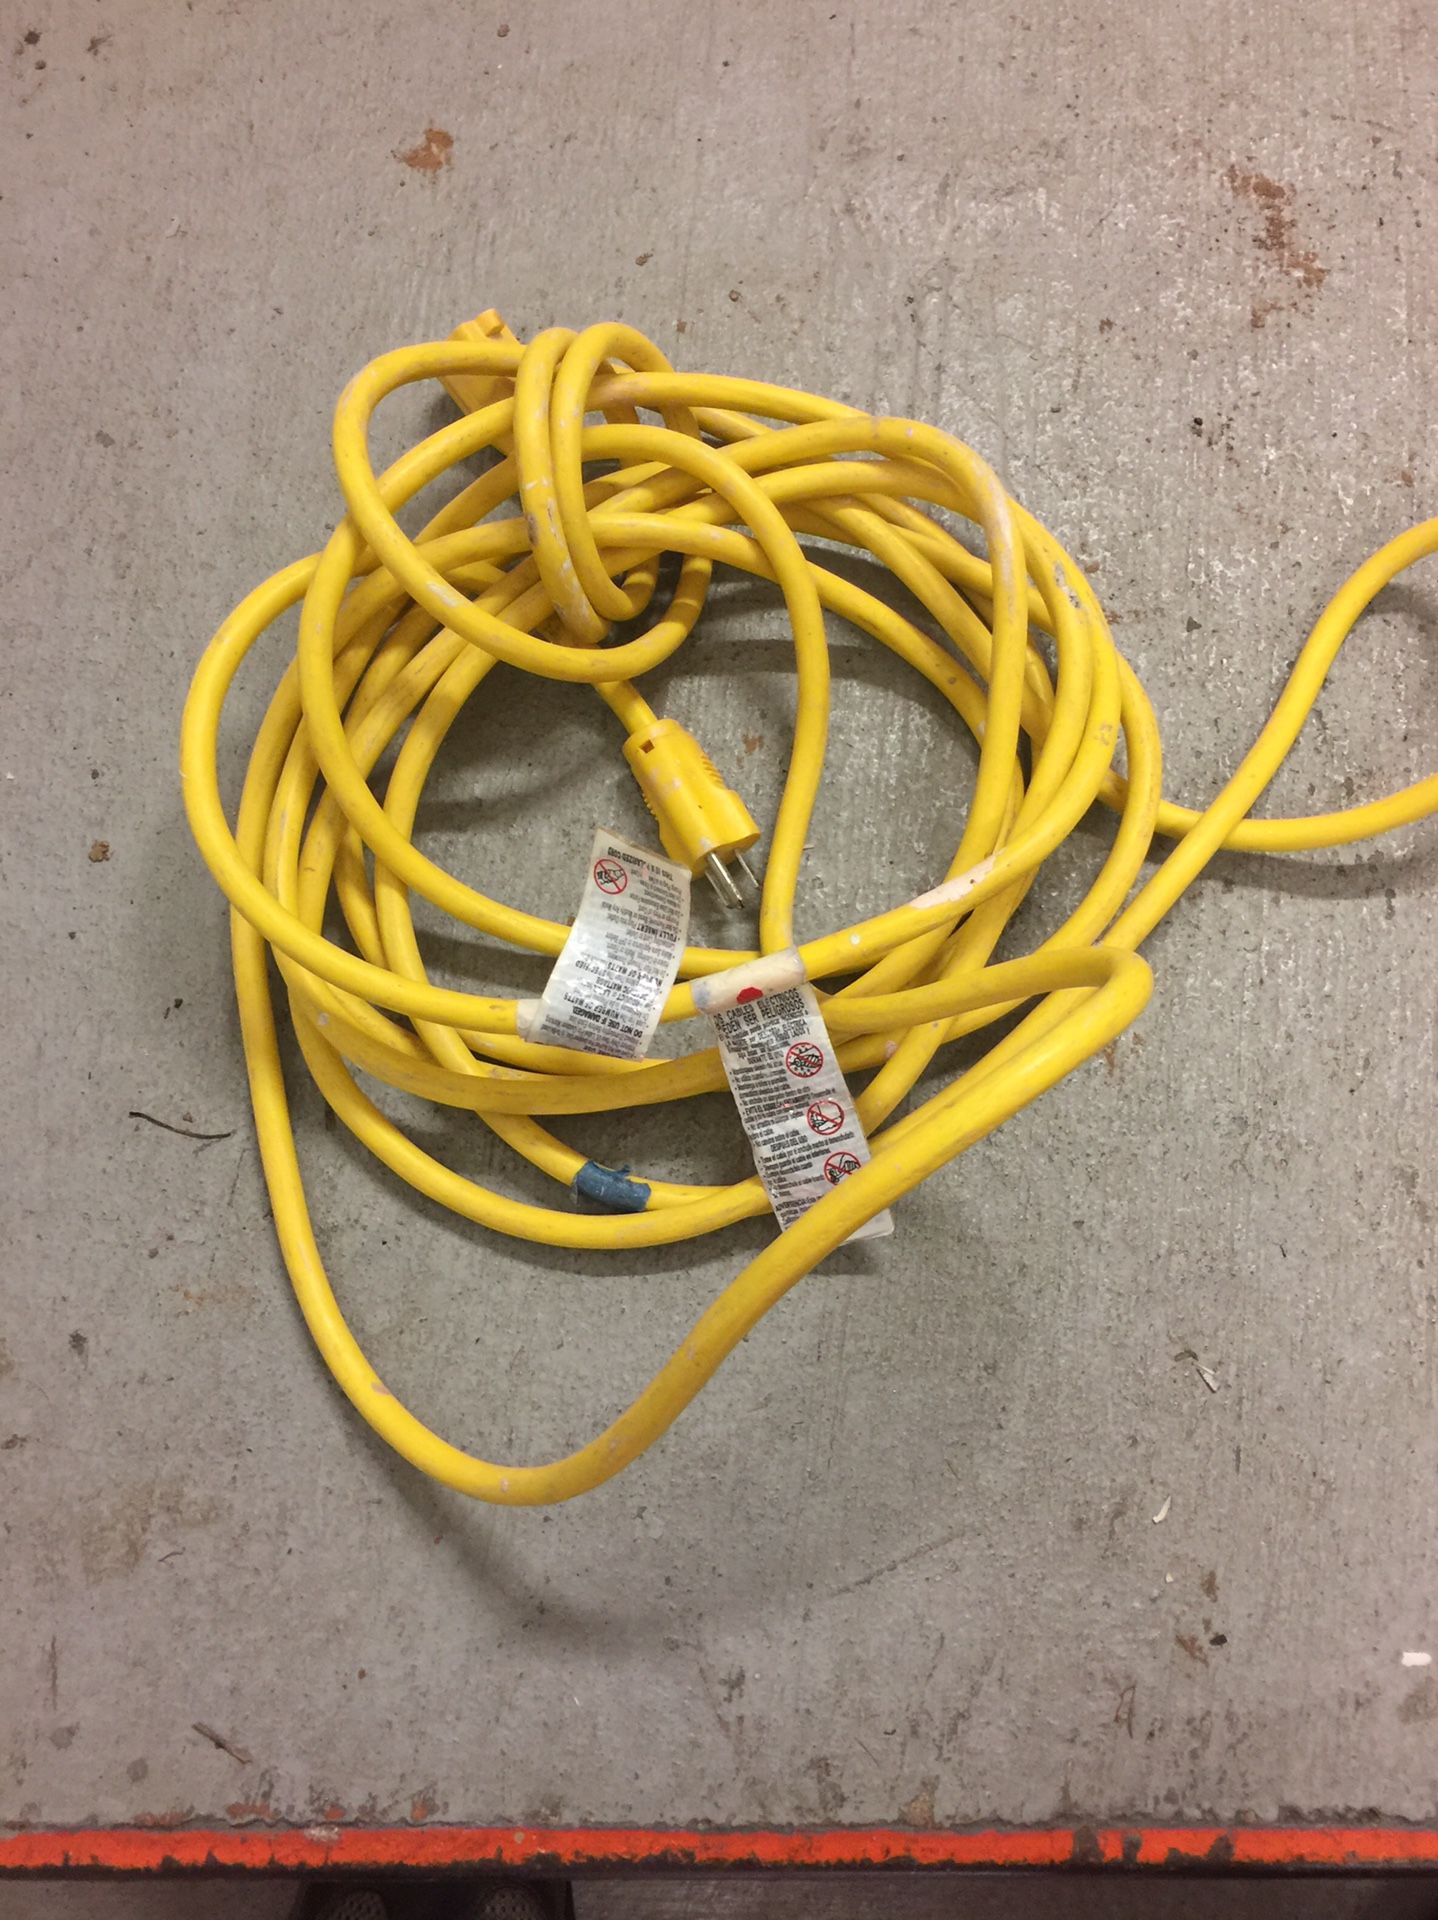 Extension Cord